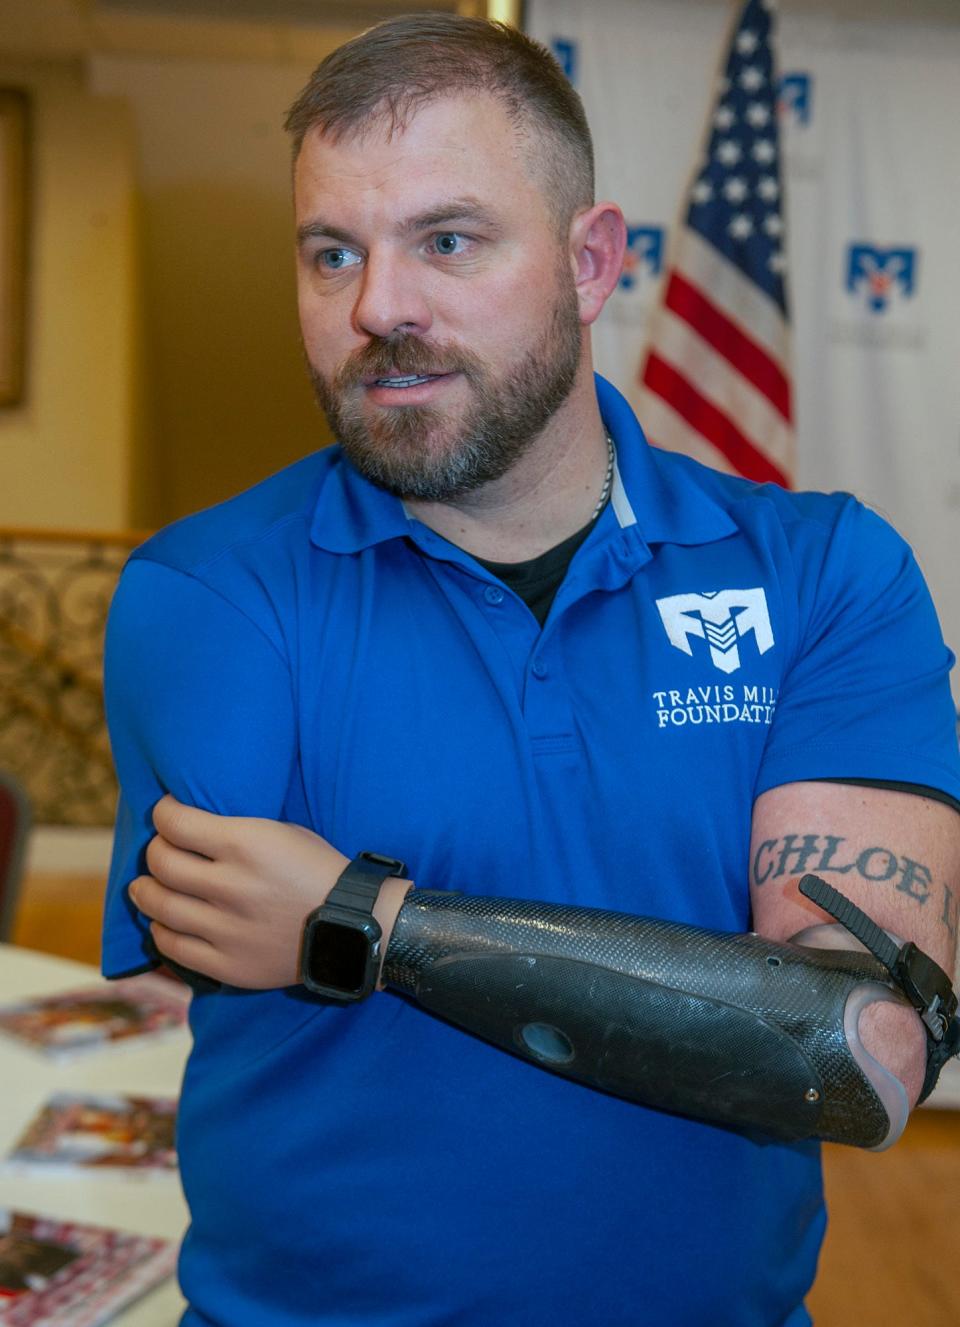 Retired U.S. Army Staff Sgt. and "recalibrated warrior" Travis Mills, of the Travis Mills Foundation, spoke Wednesday at La Cantina Italiana Restaurant in Framingham, Jan. 17, 2024.